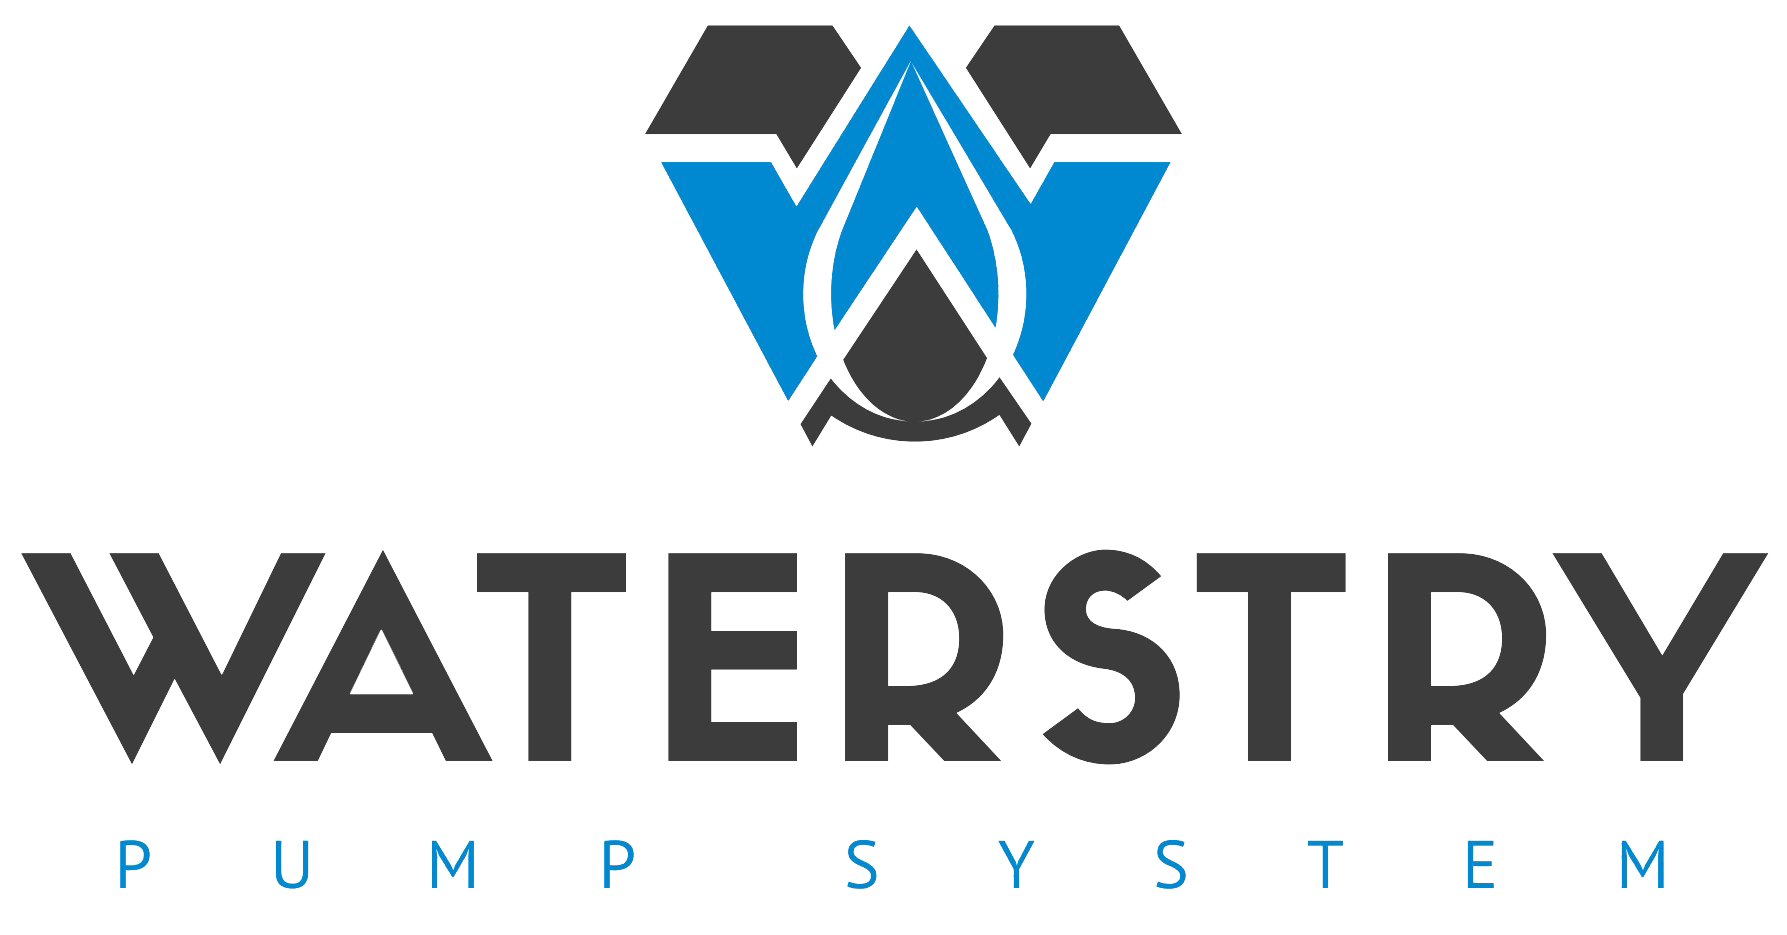 WATERSTRY